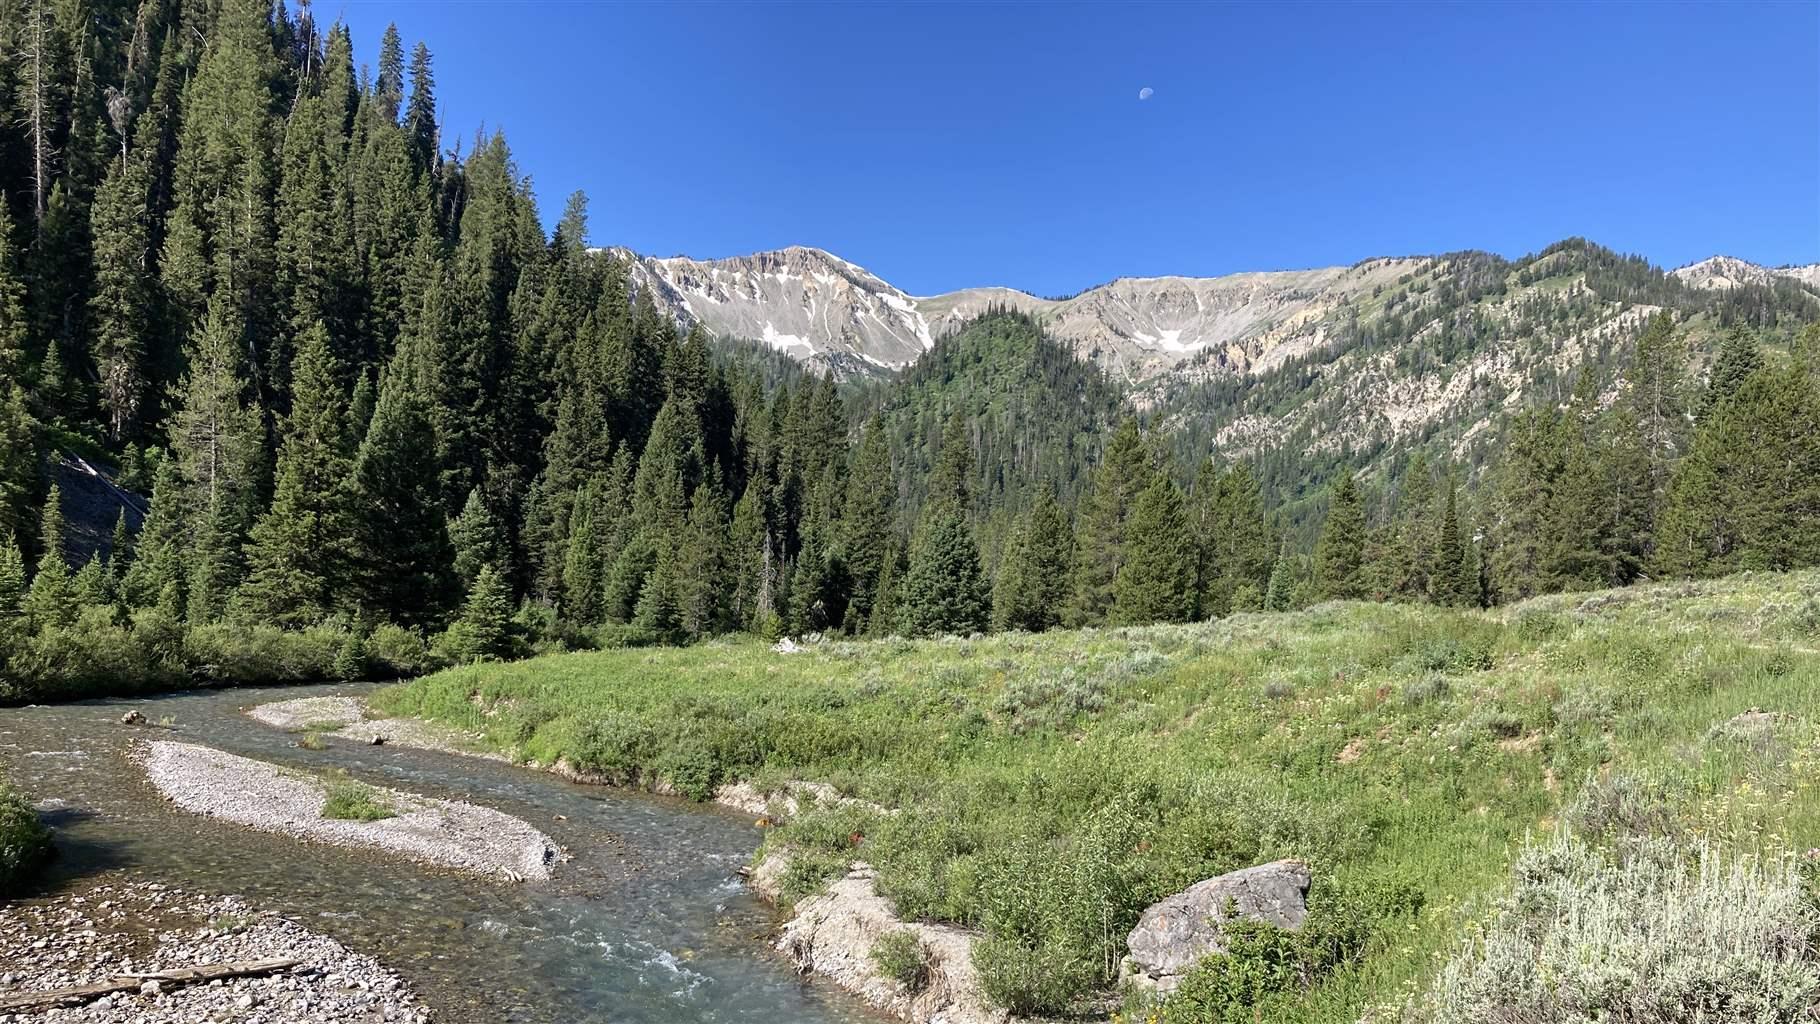 Murphy Creek in Bridger-Teton National Forest. Nearby campsites offer visitors a place to stay and enjoy these intact public lands and waterways.